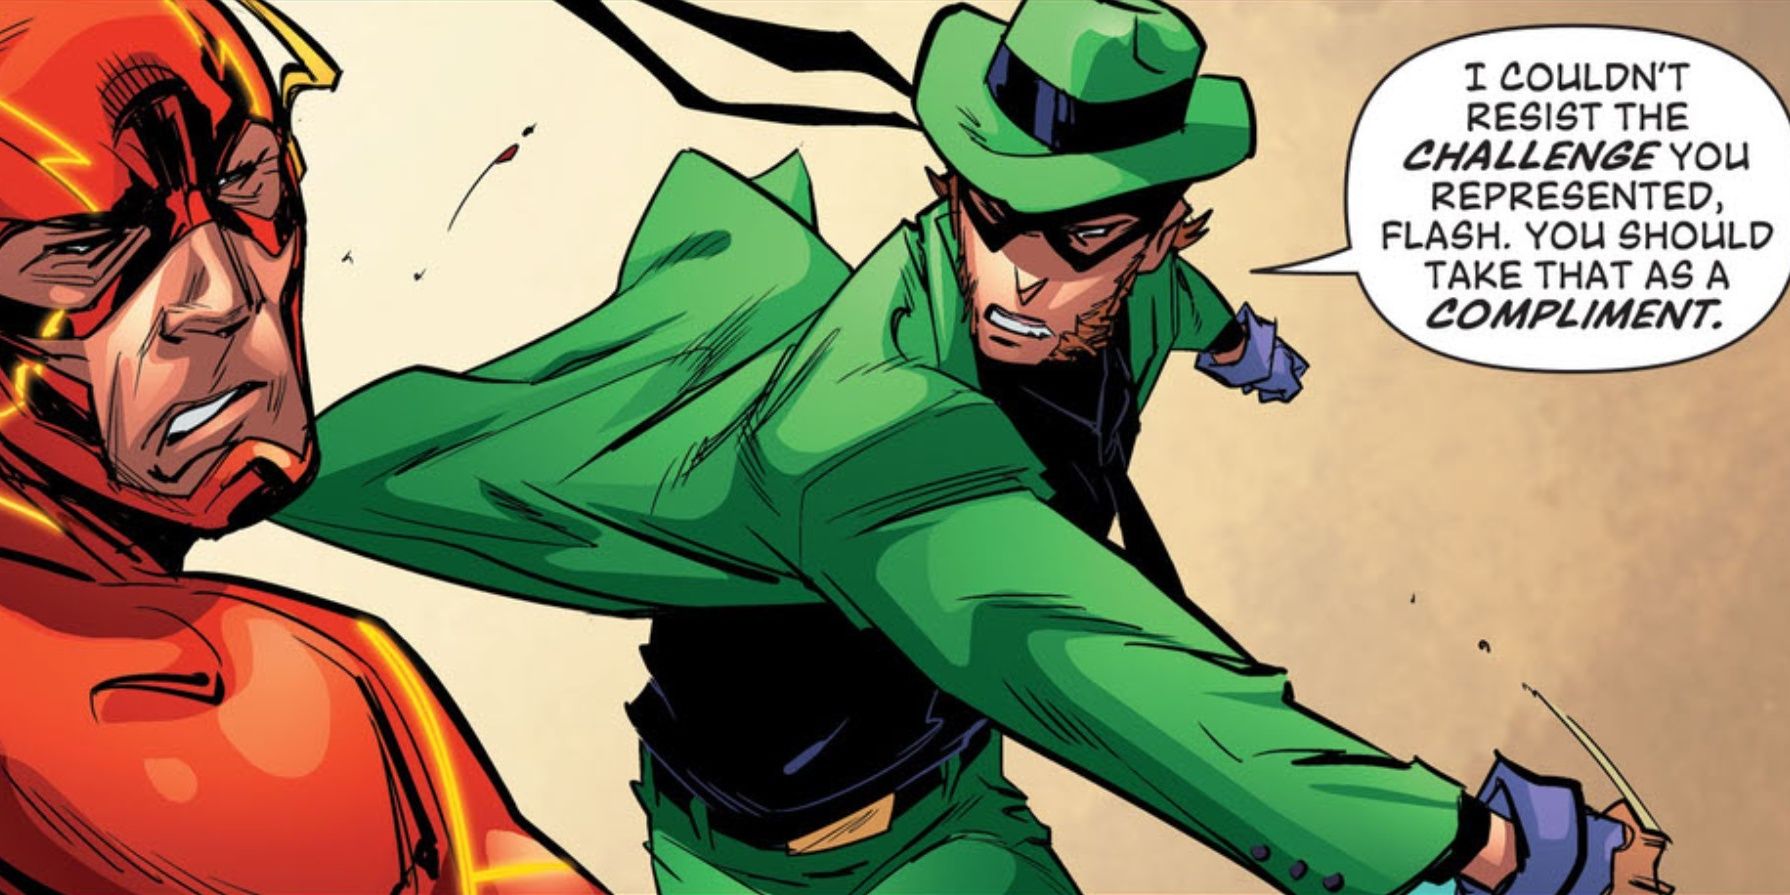 The Riddler and the Flash in DC Comics